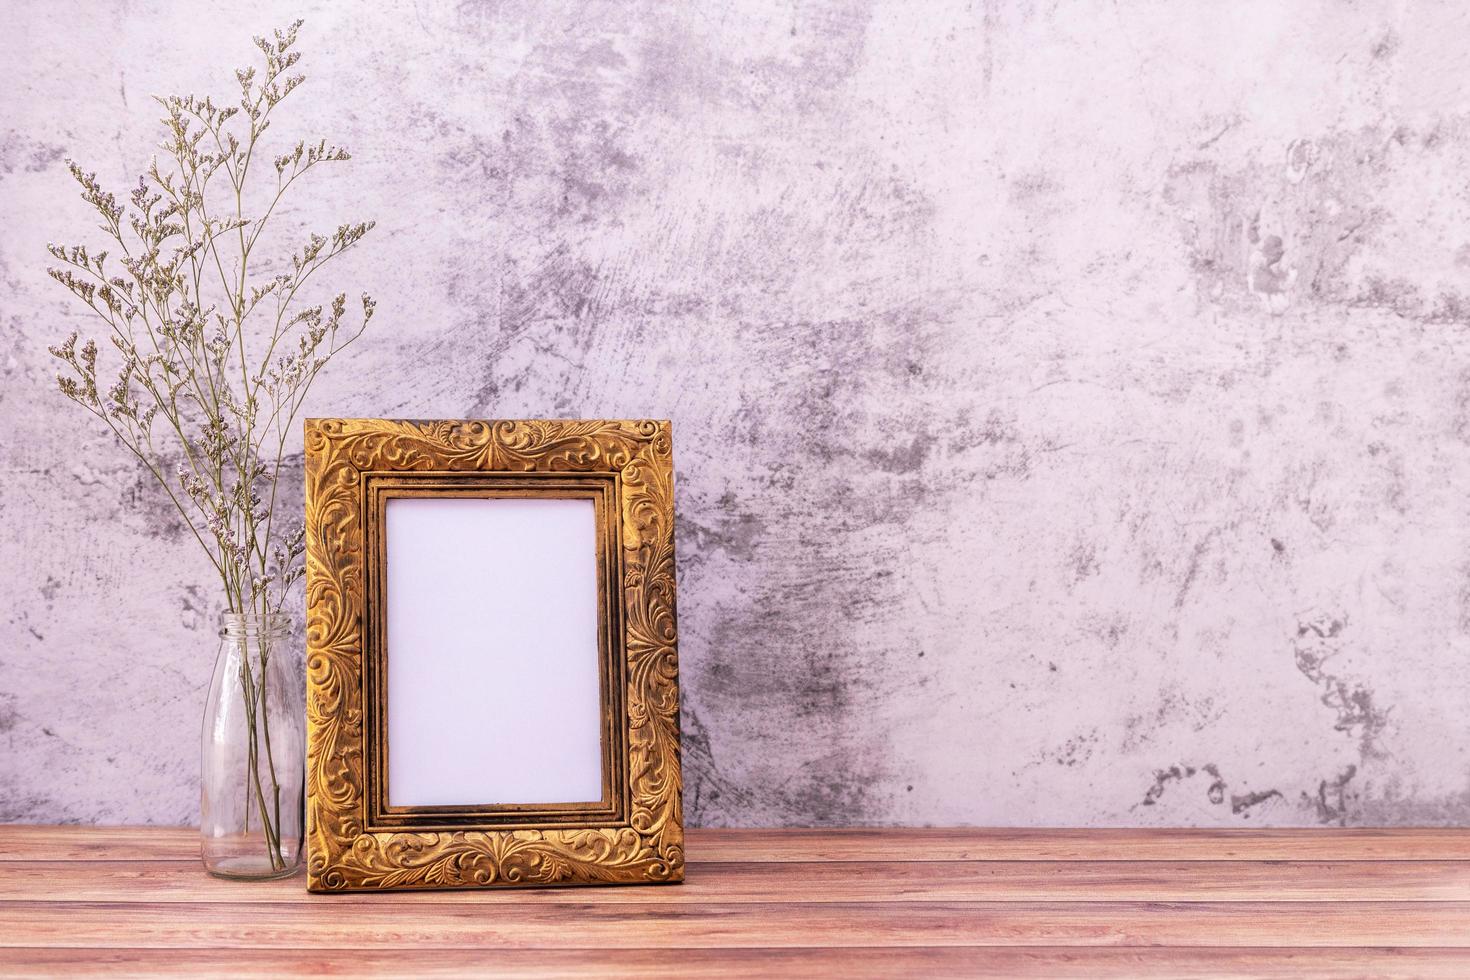 Picture frame with flowers on wall background and wooden table. Poster product design styled photo